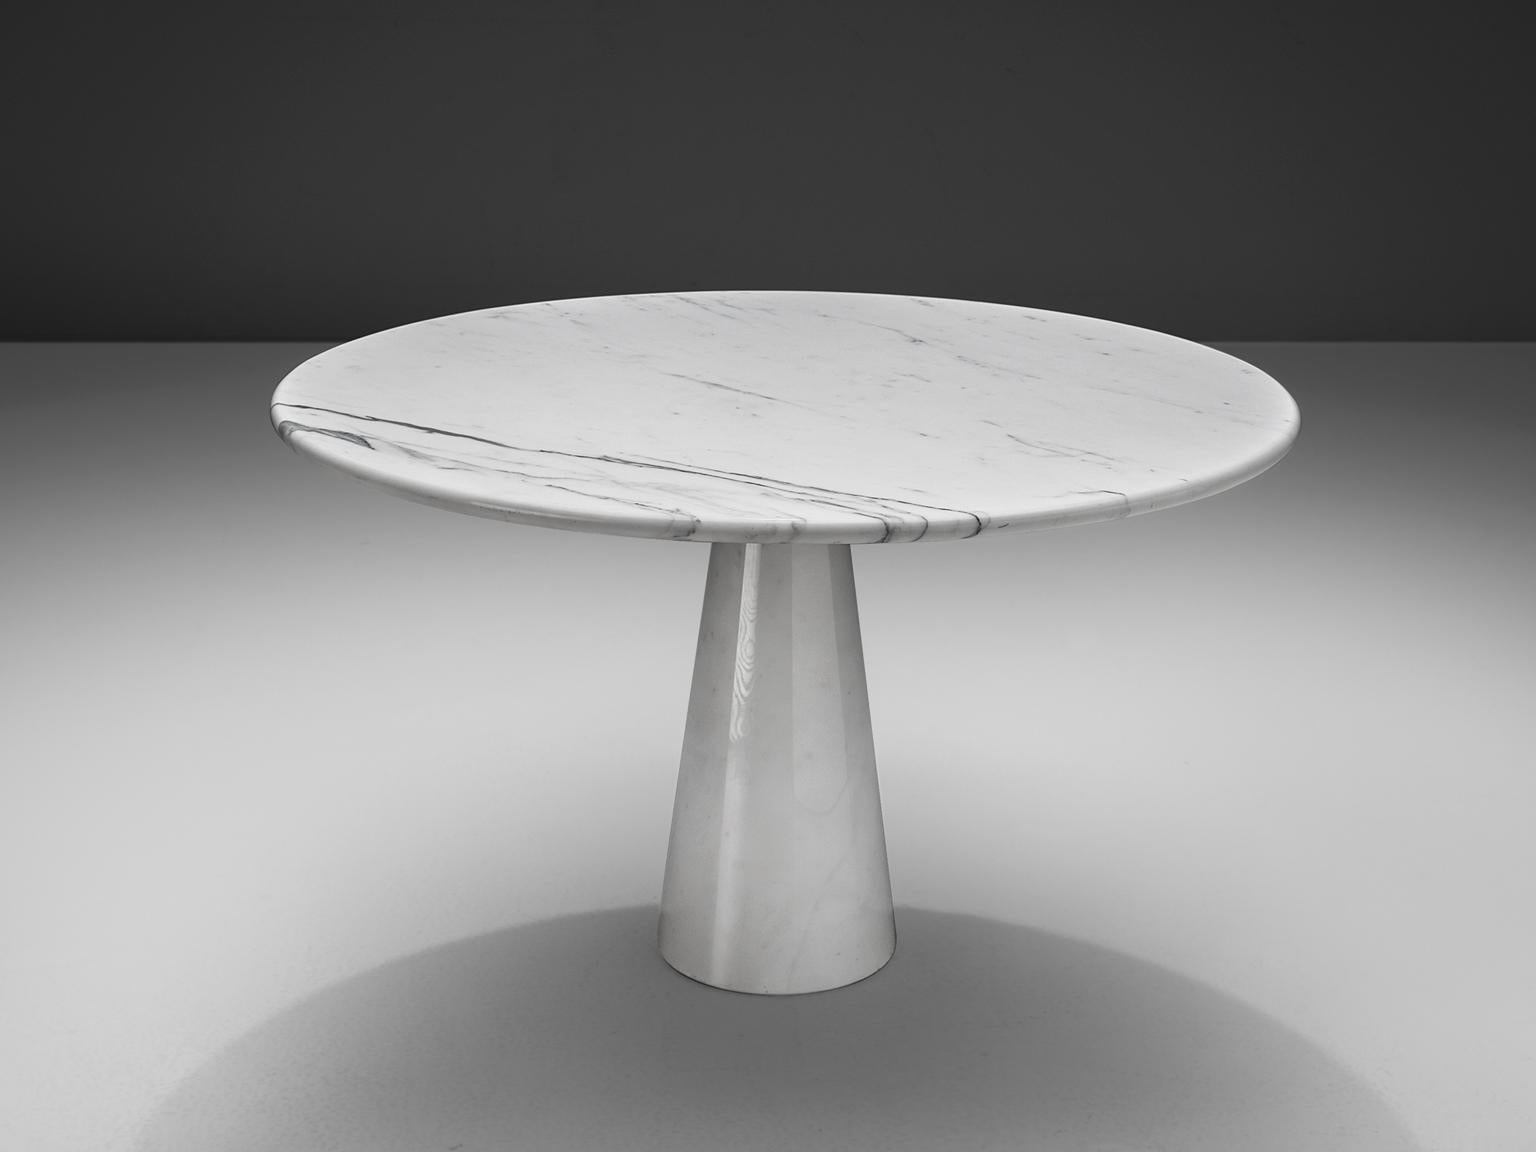 Round dining table, white marble, Europe, 1970s.

This round pedestal table has white round base with cone-shaped column. The round top is executed in exquisite white marble. A great harmony arises due to the use of identical material and